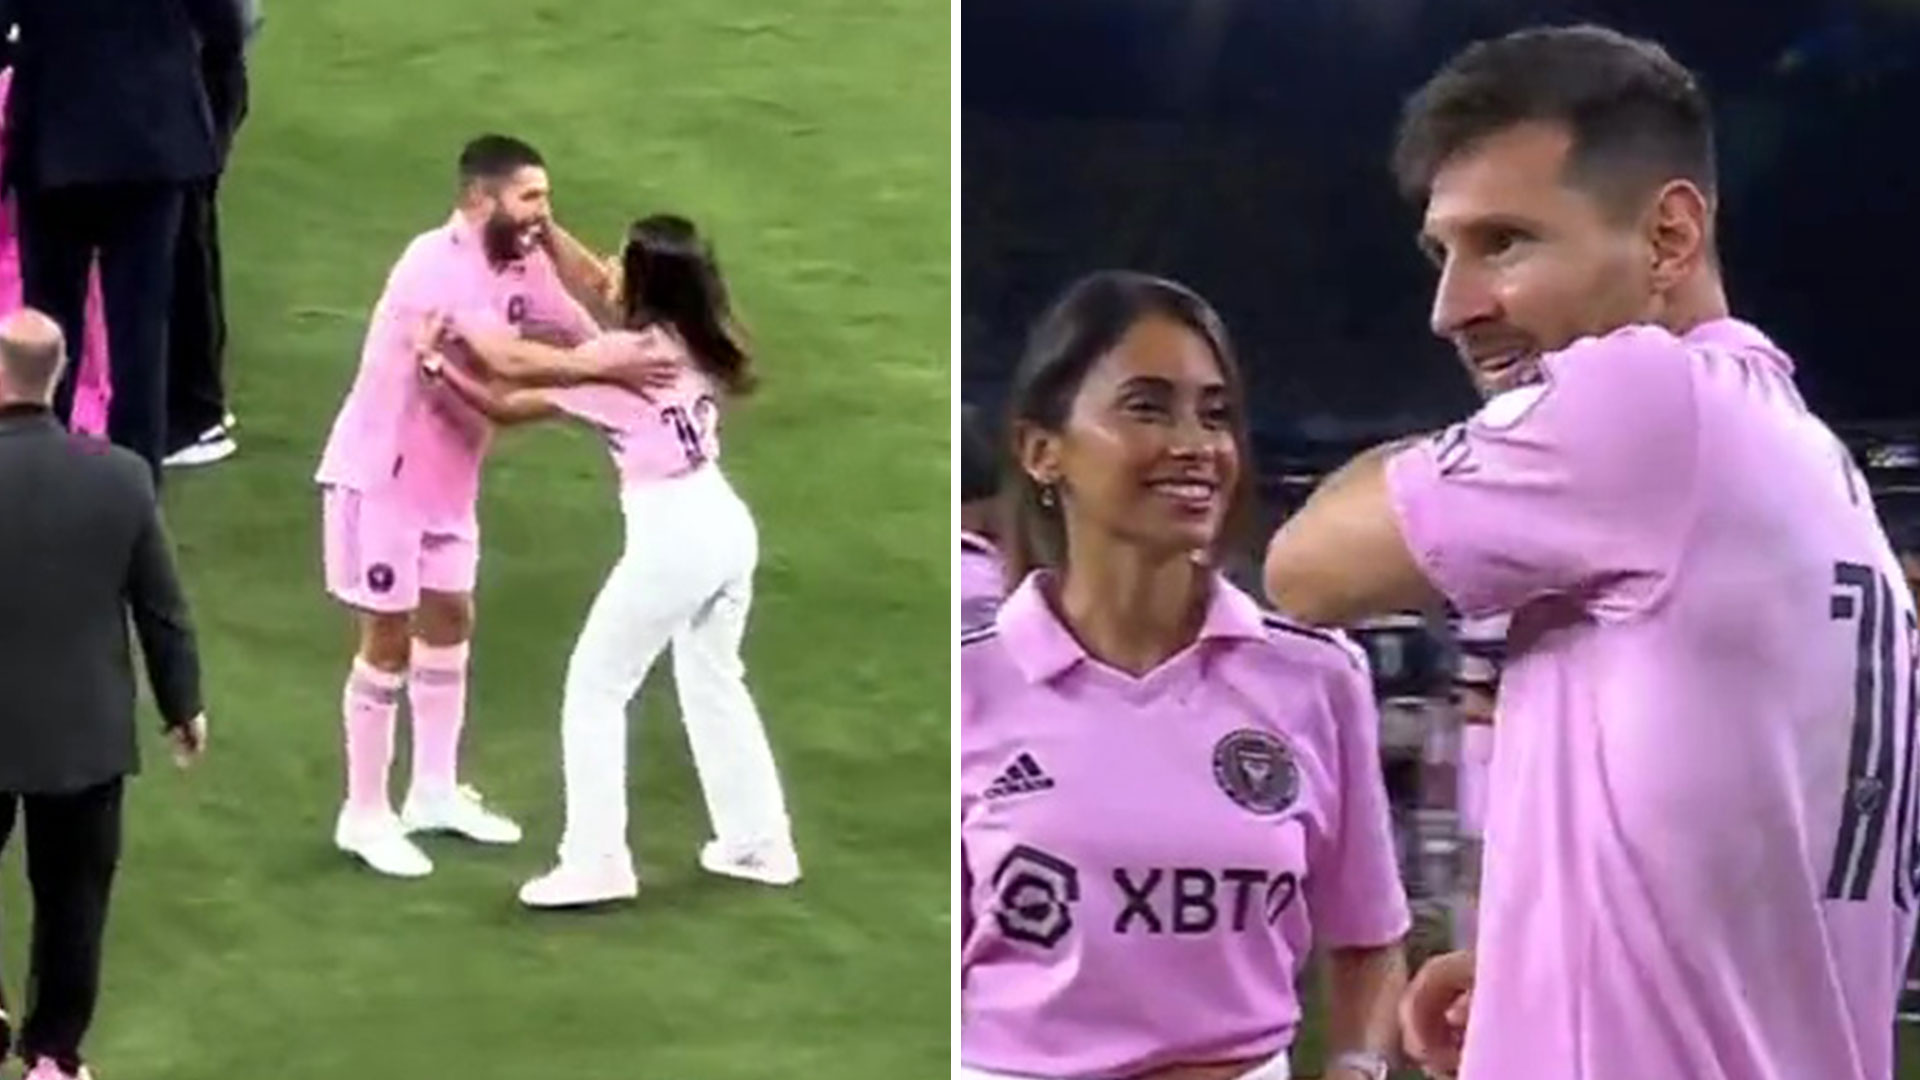 Watch moment Lionel Messi's wife 'mistakes his team-mate for him' as she  runs over to give wrong man a hug | The Sun